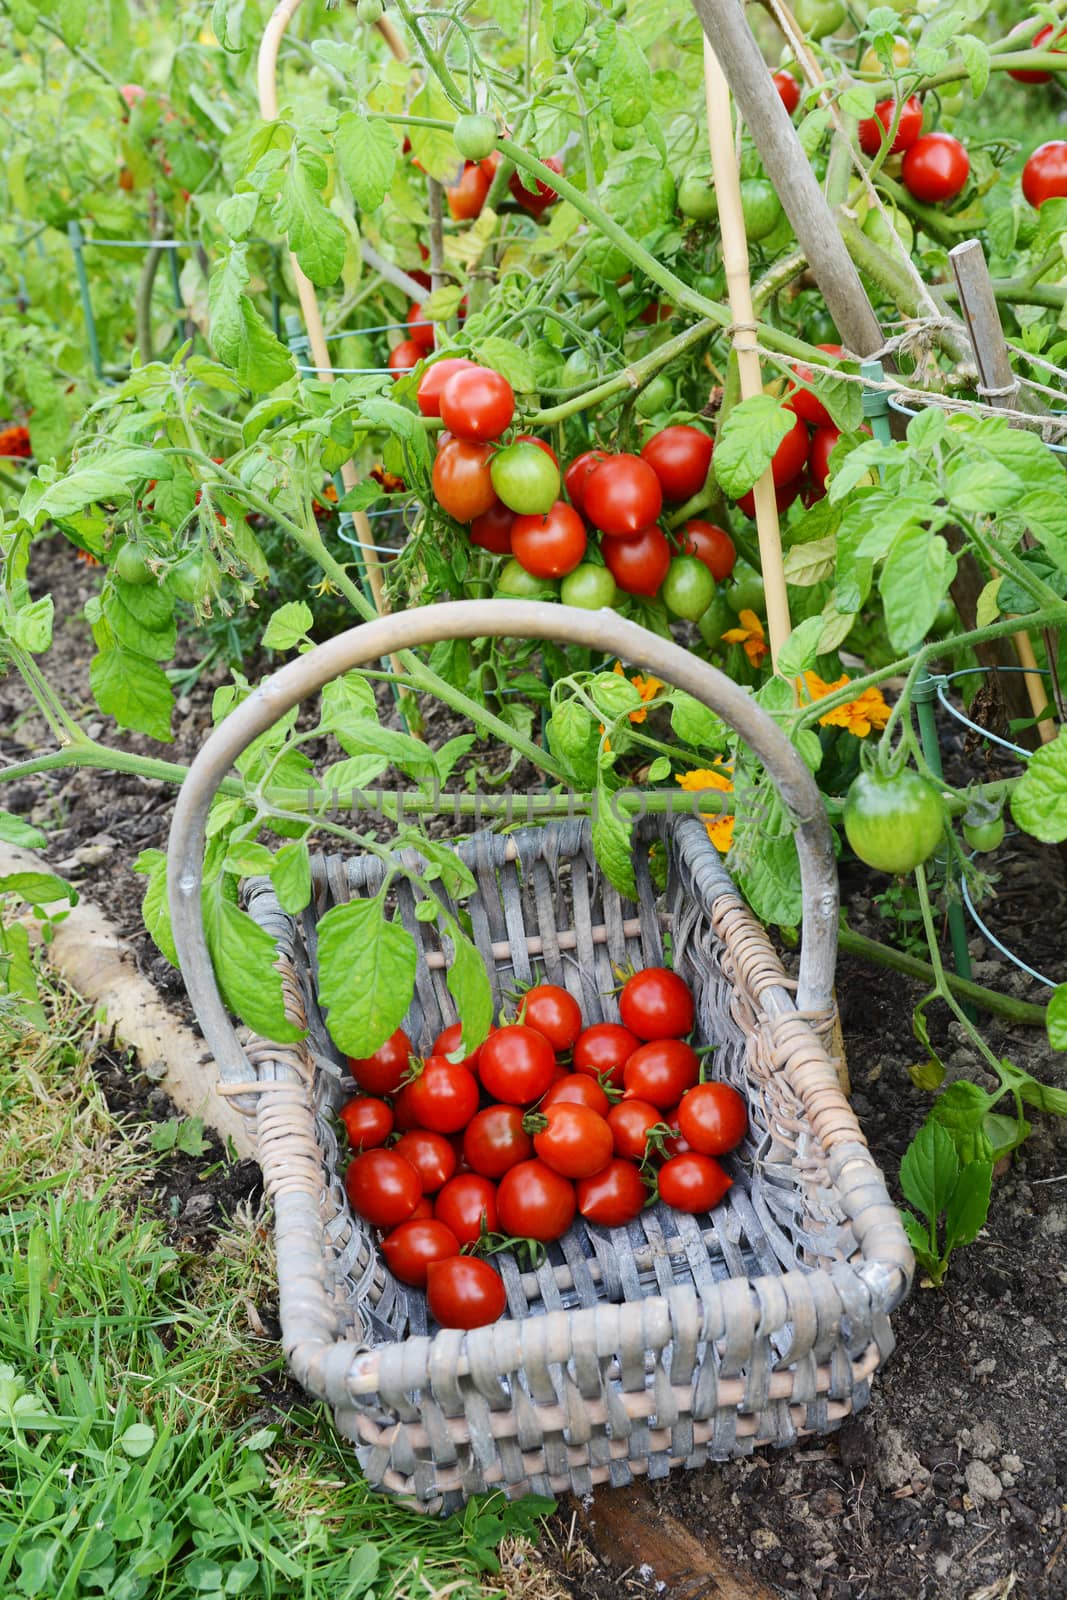 Basket half-filled with cherry tomatoes below a tomato plant by sarahdoow